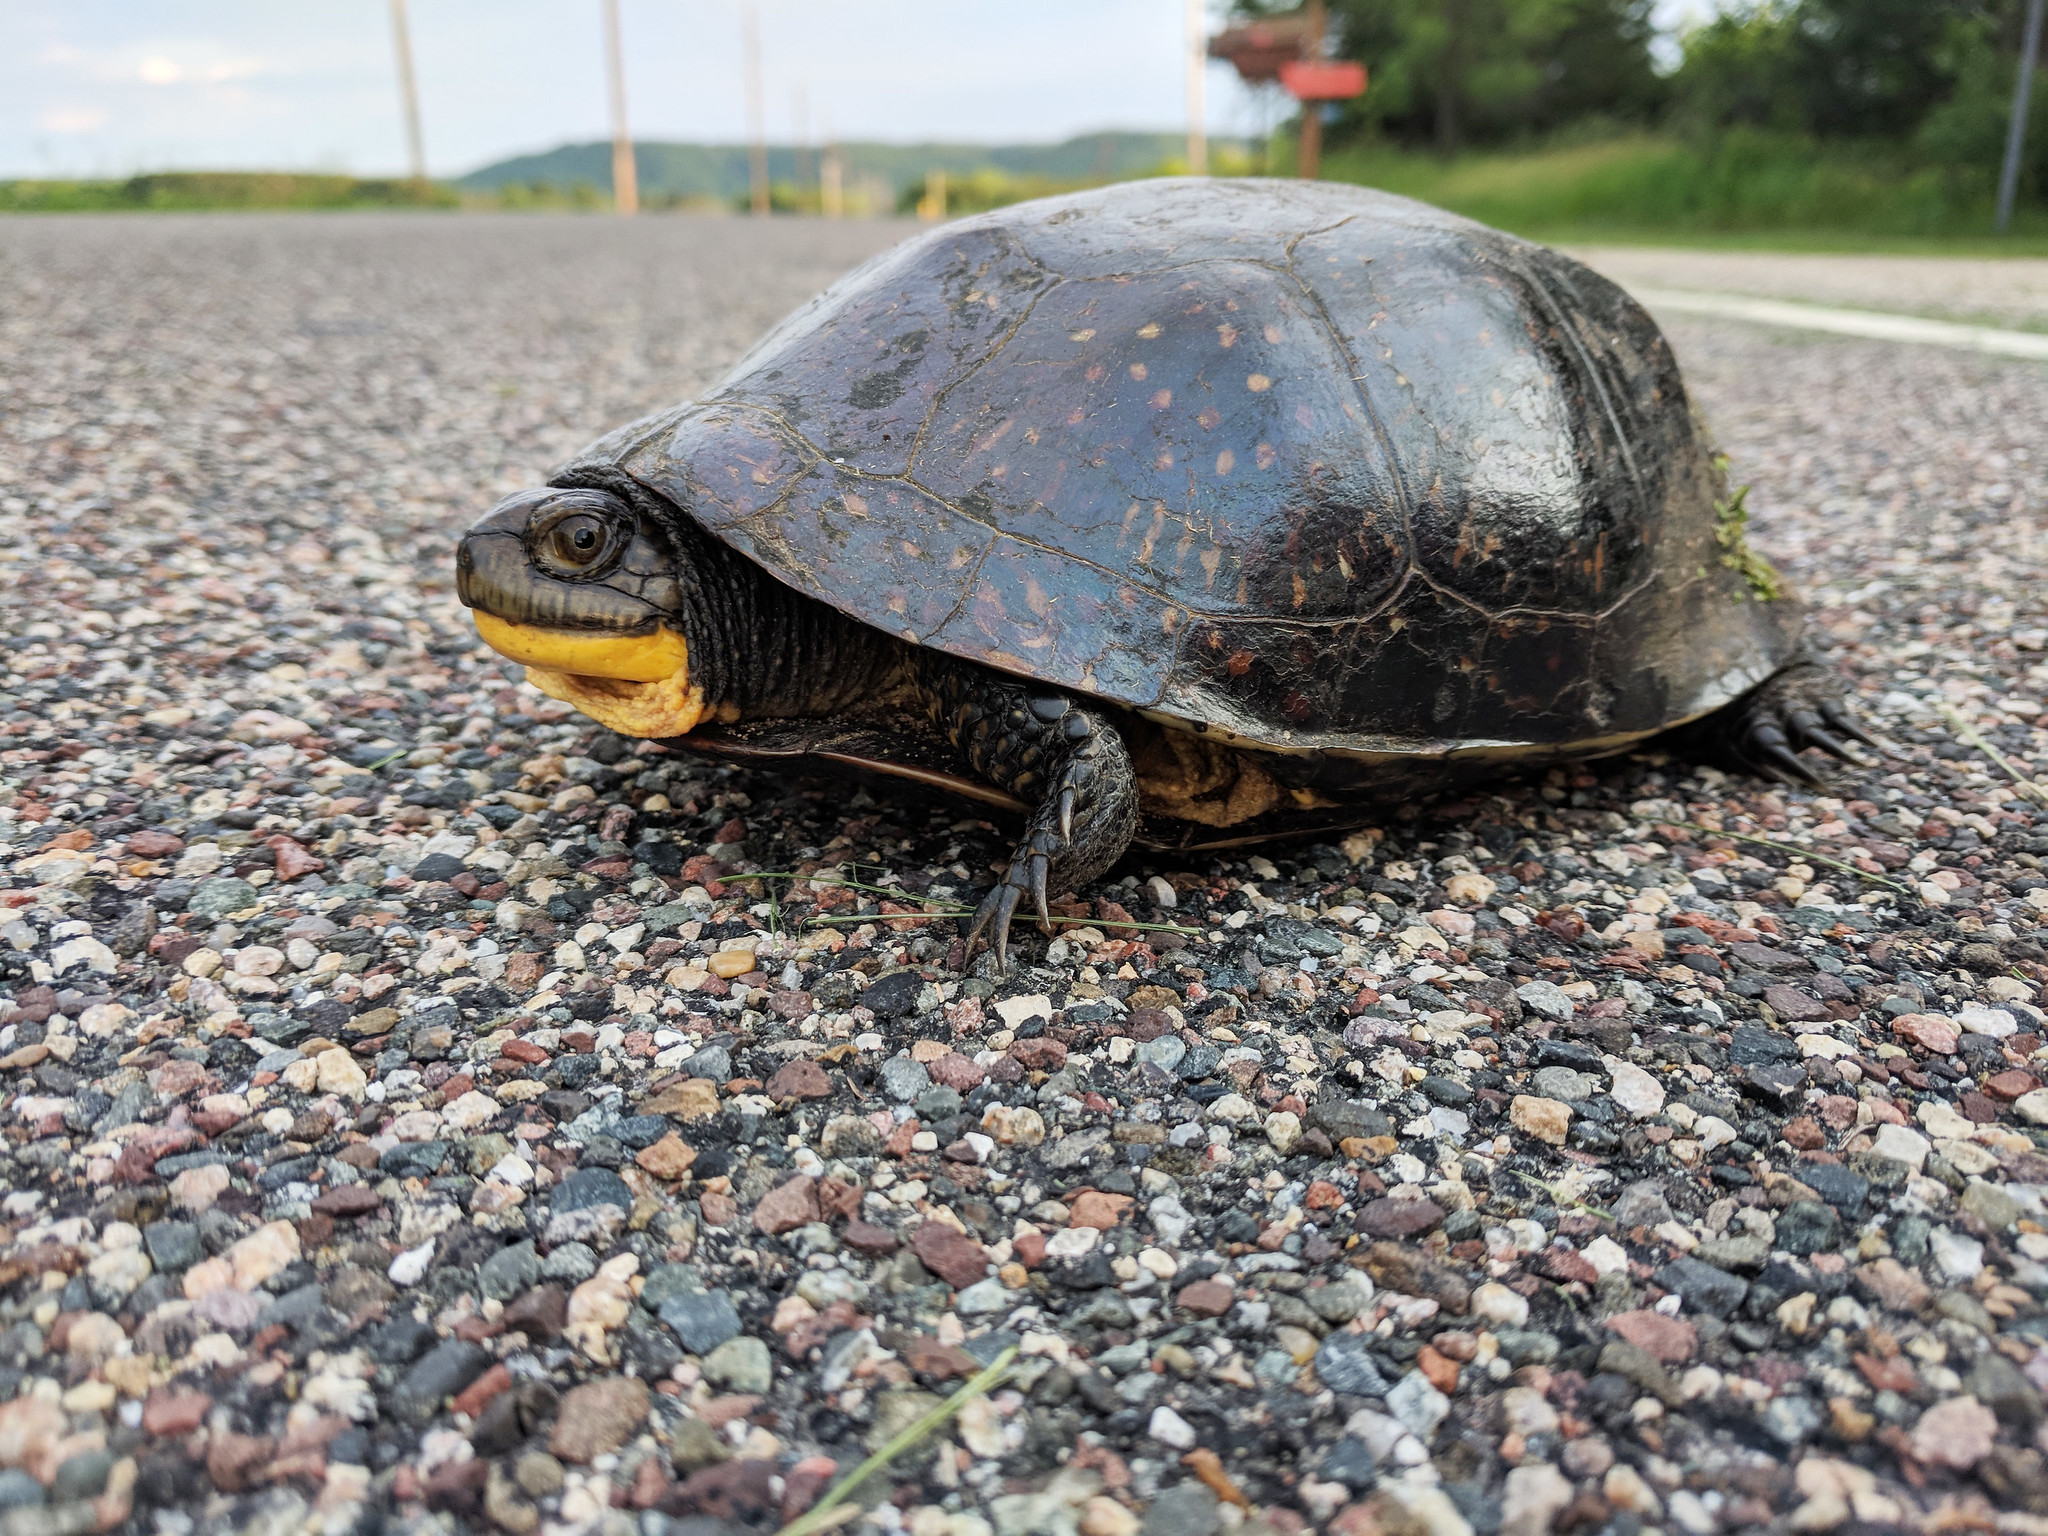 A Blanding's turtle crosses a road.